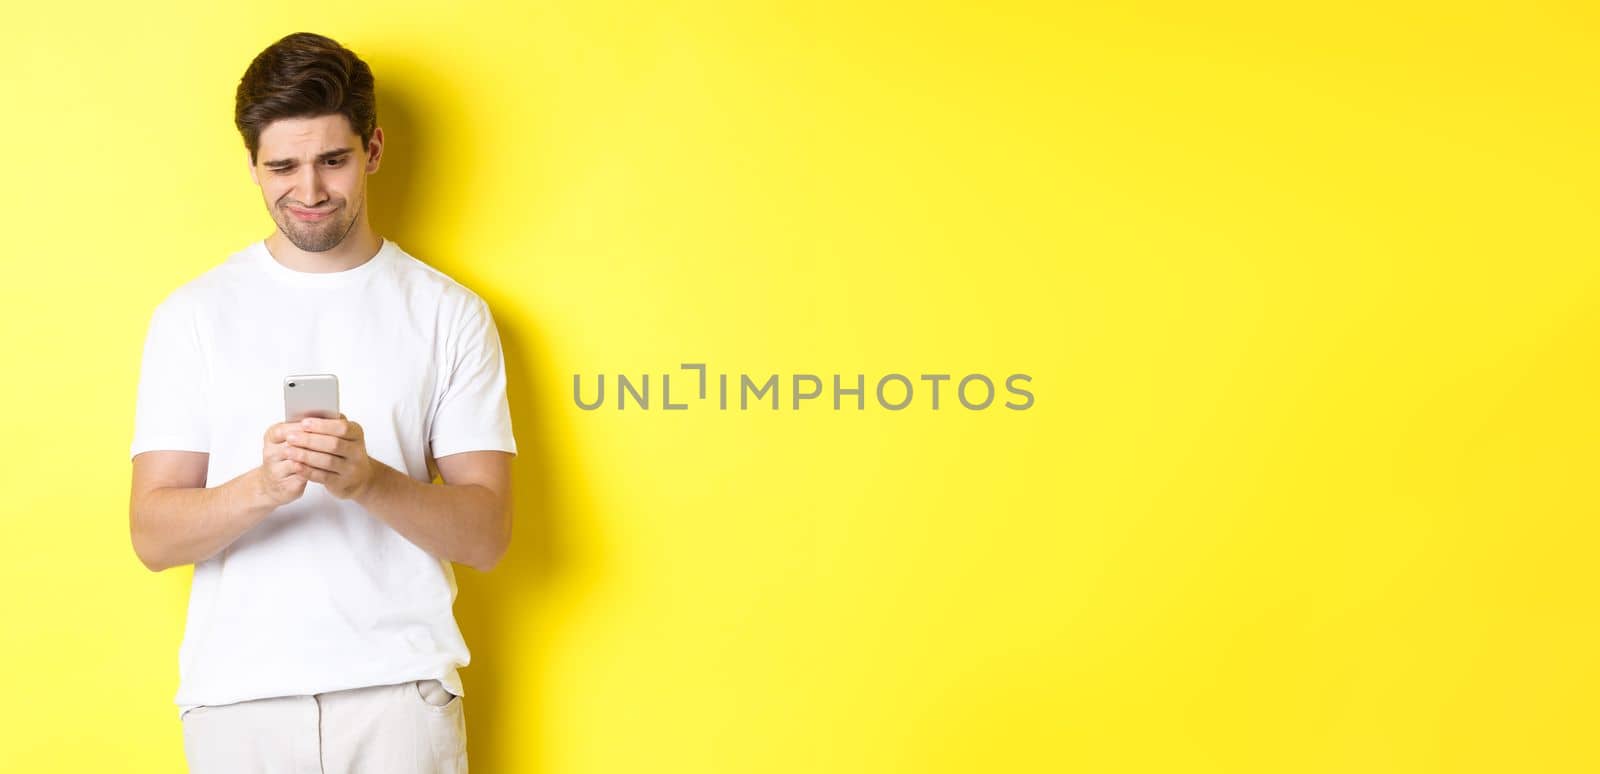 Guy looking displeased at smartphone screen, reading strange message on phone, standing in white t-shirt against yellow background by Benzoix